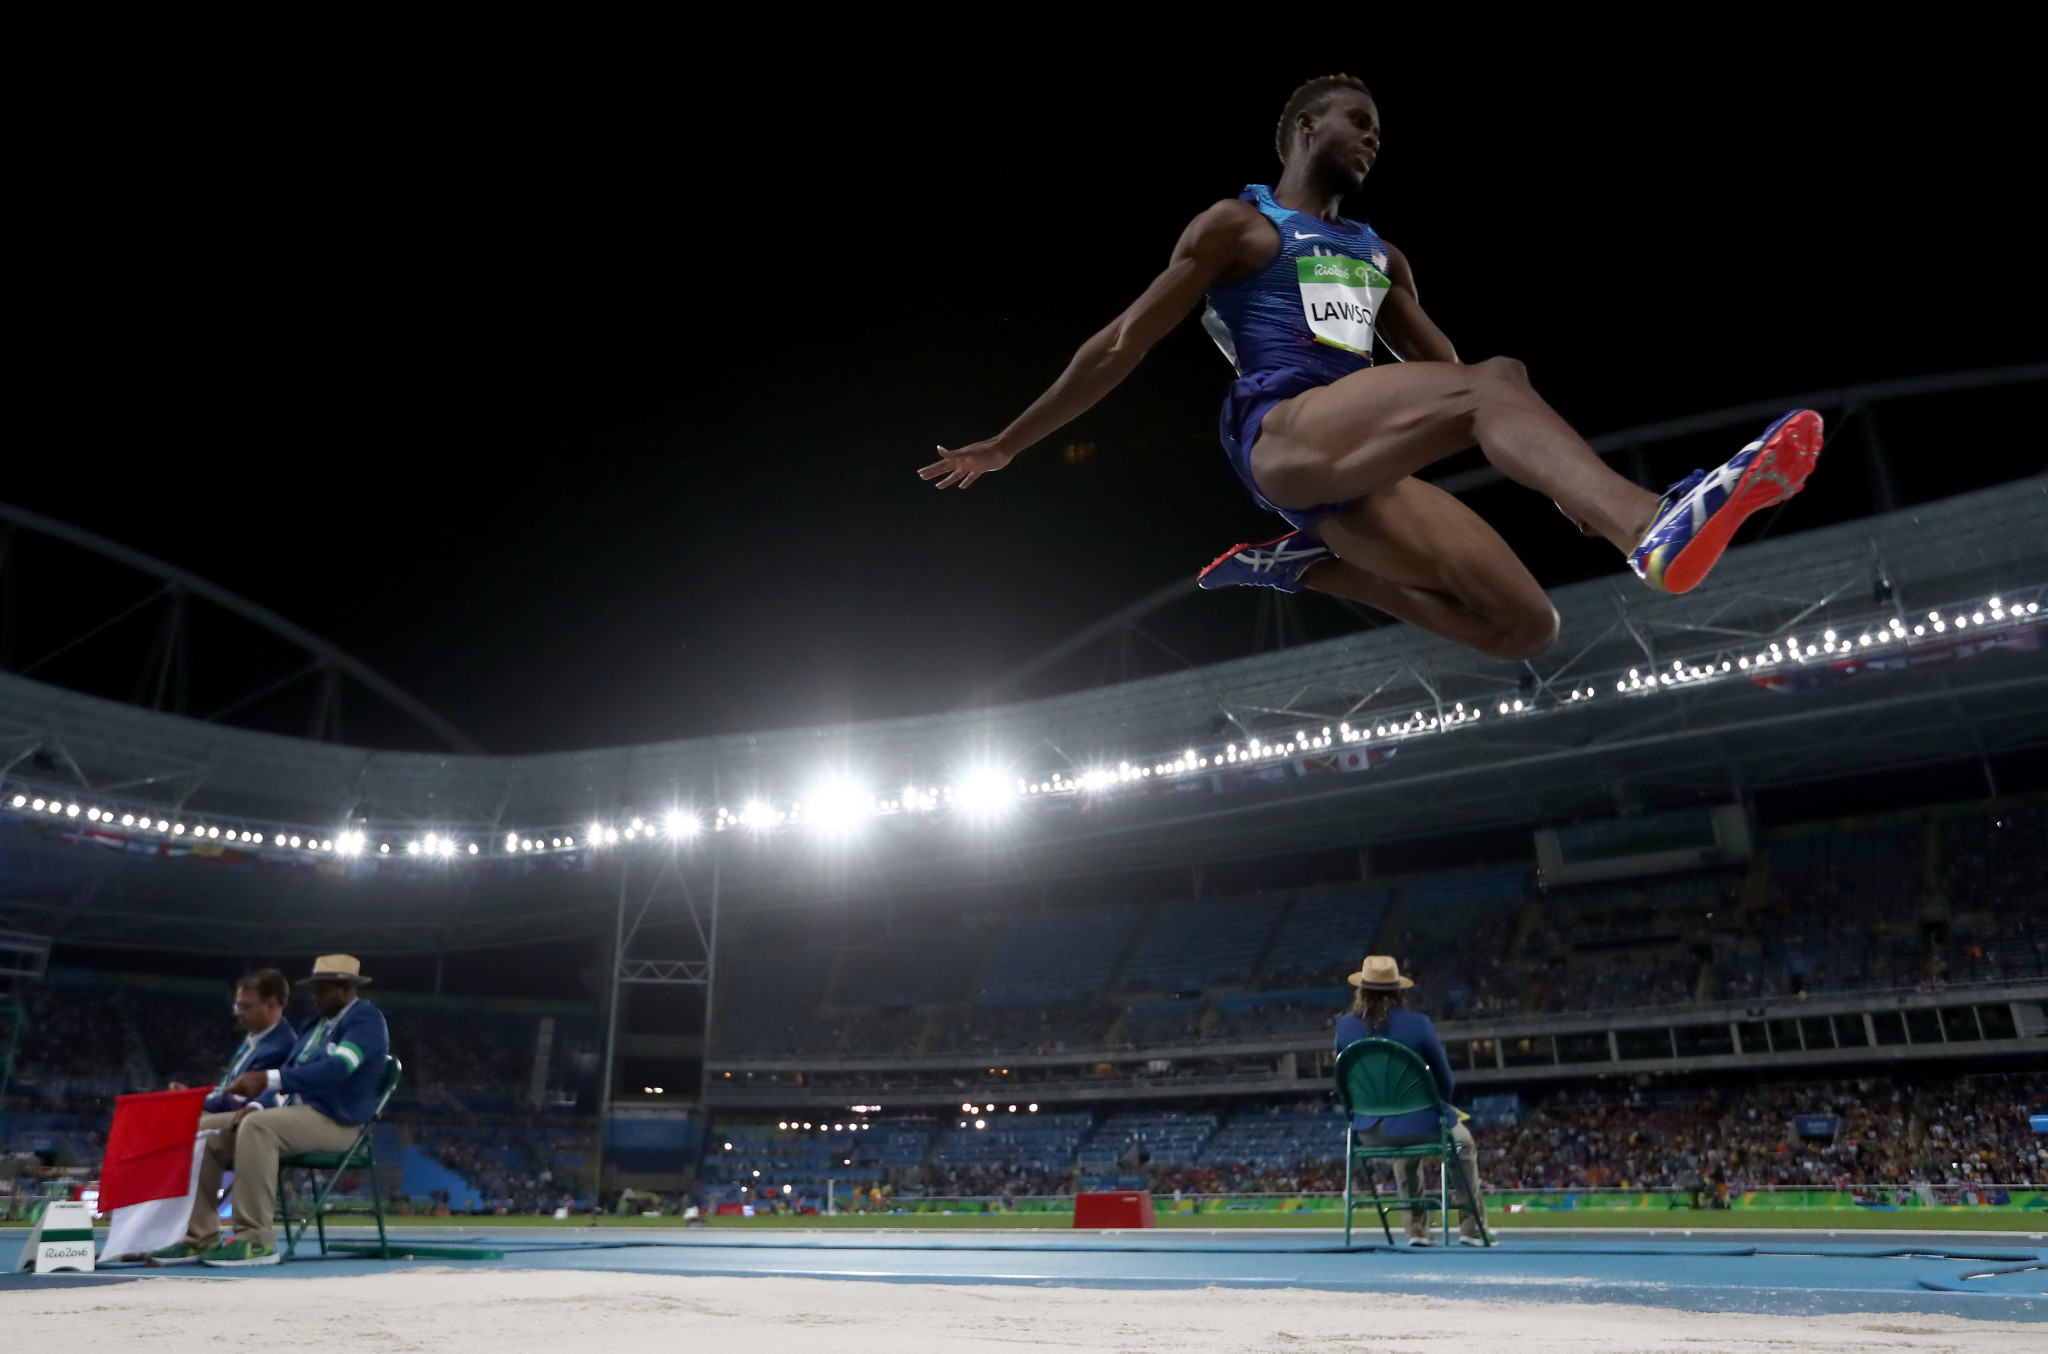 Jarrion Lawson will now be able to compete at the Tokyo 2020 Olympic Games, having finished fourth at Rio 2016 ©Getty Images